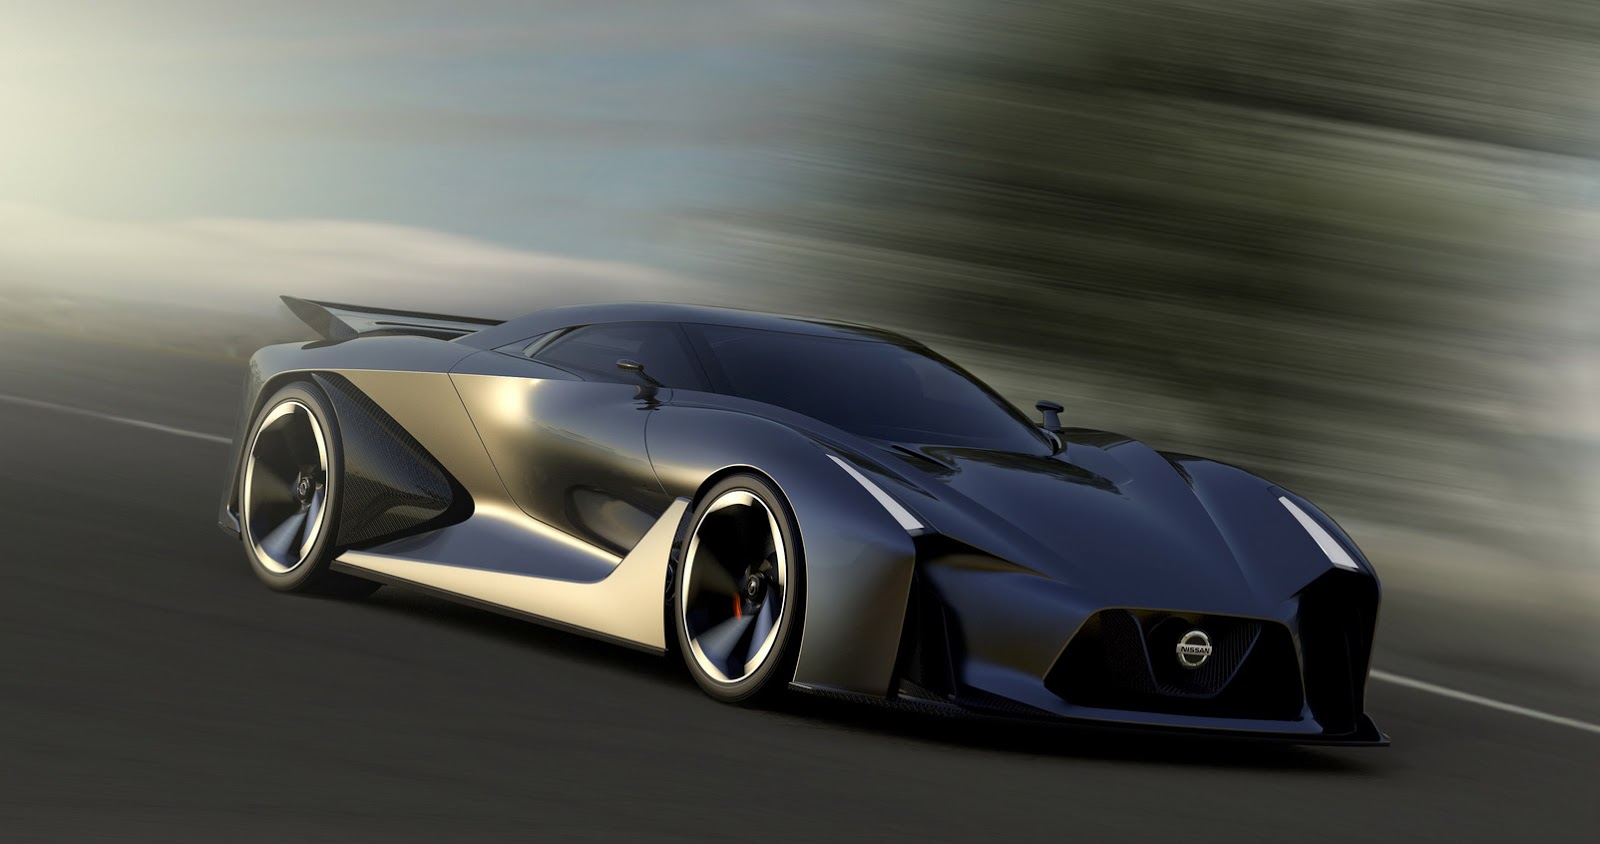 Automotive Designer Shows What He Thinks the R36 Nissan Skyline GT-R Should  Look Like - TechEBlog